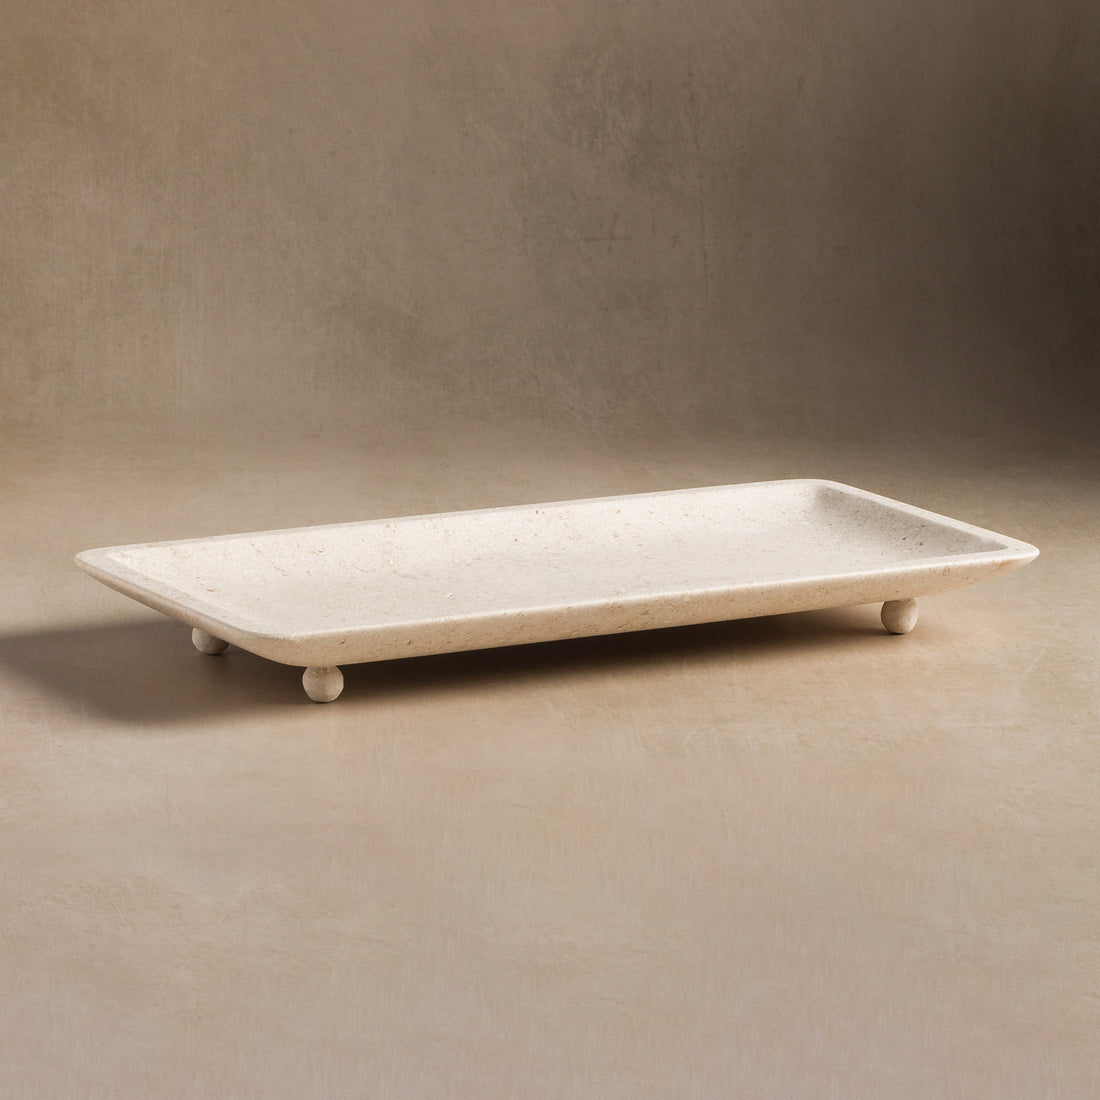 Luxury stone tray for home decor made from cream limestone